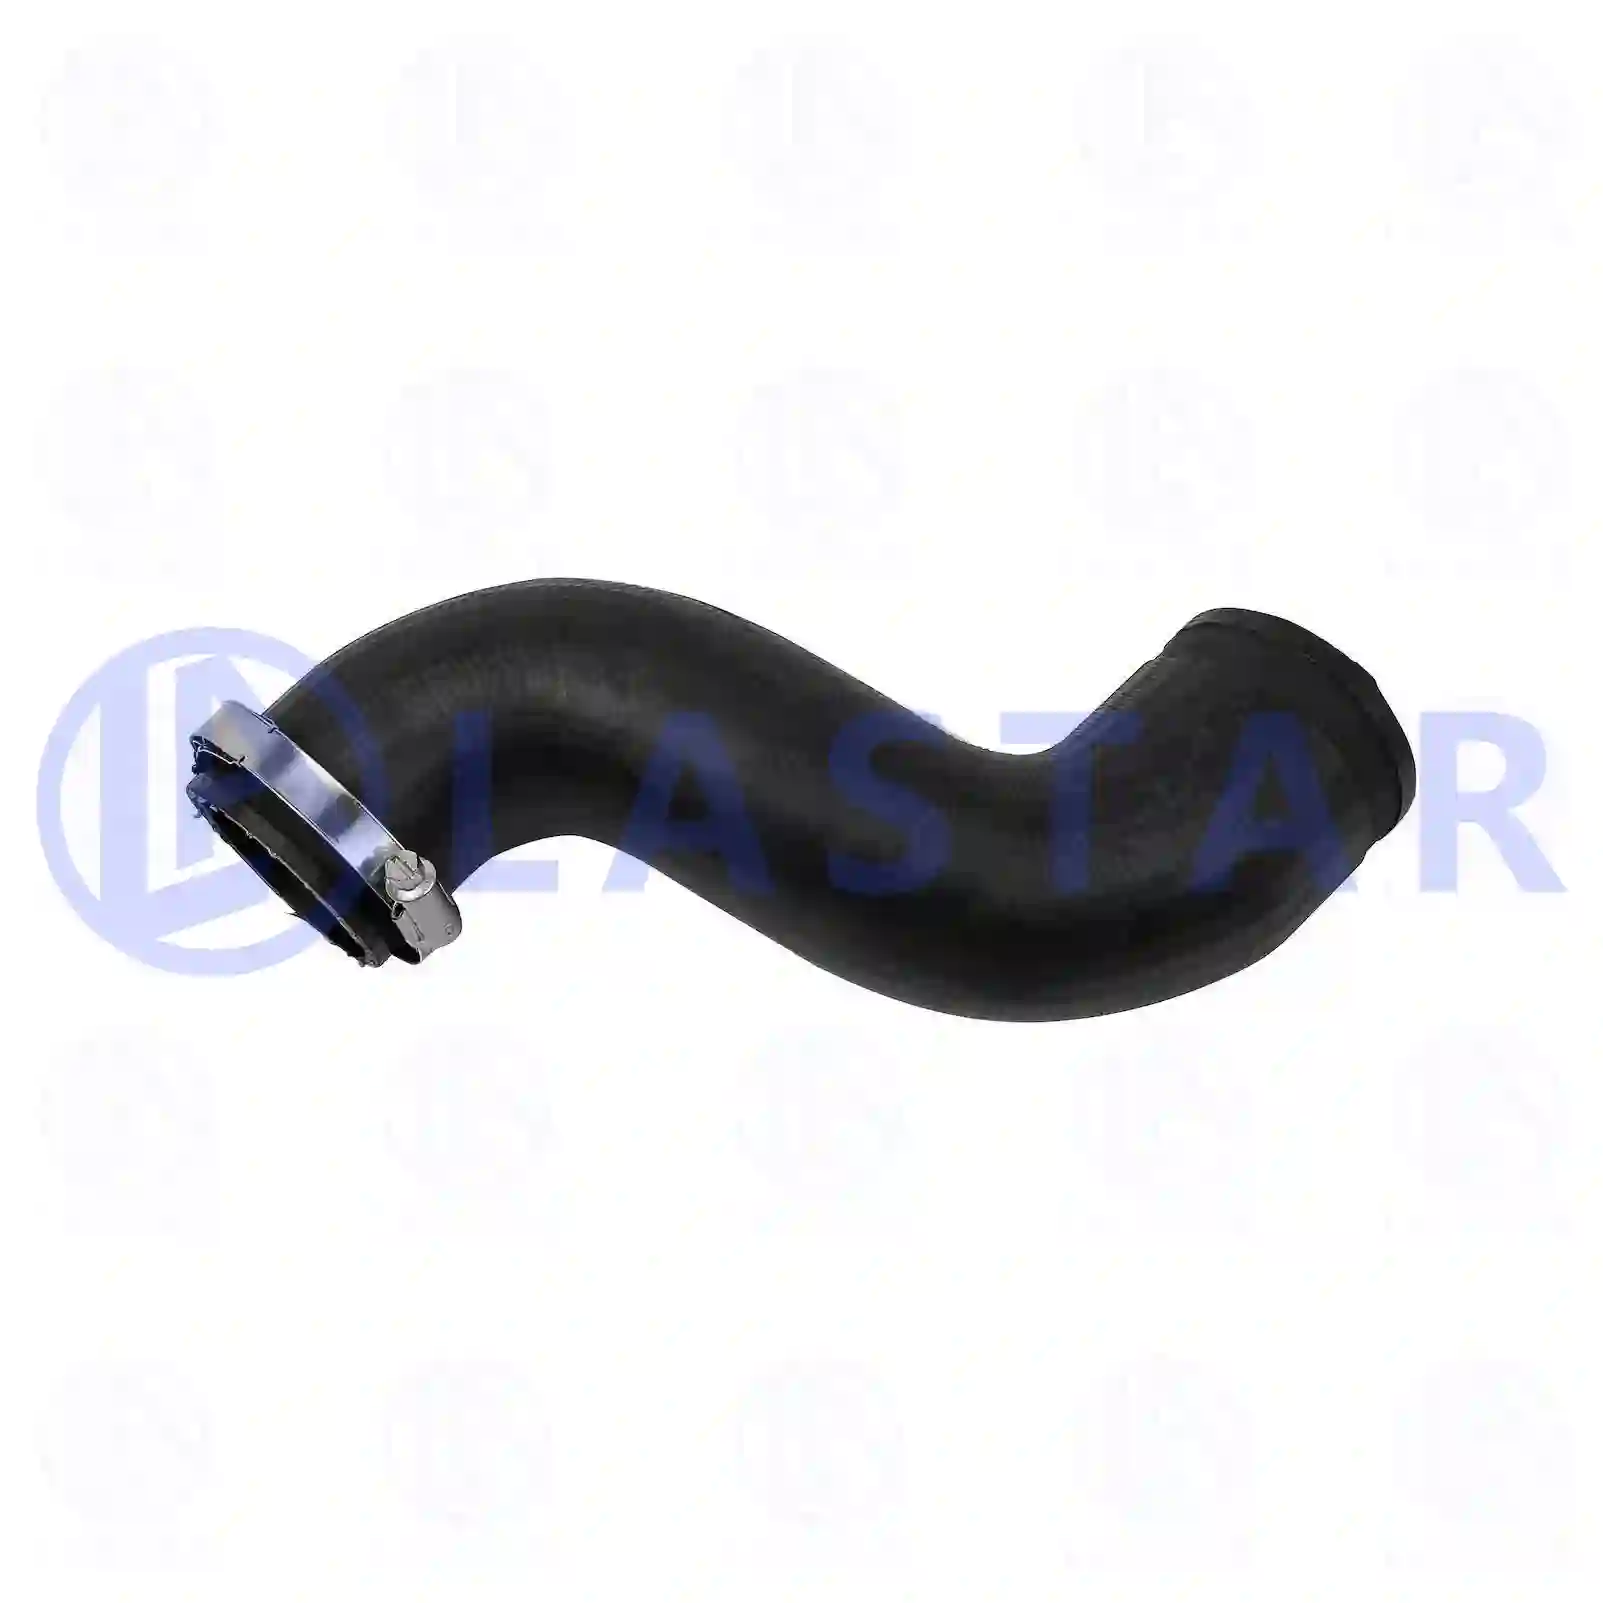 Charge air hose, 77708403, 9065280182, ZG00307-0008 ||  77708403 Lastar Spare Part | Truck Spare Parts, Auotomotive Spare Parts Charge air hose, 77708403, 9065280182, ZG00307-0008 ||  77708403 Lastar Spare Part | Truck Spare Parts, Auotomotive Spare Parts